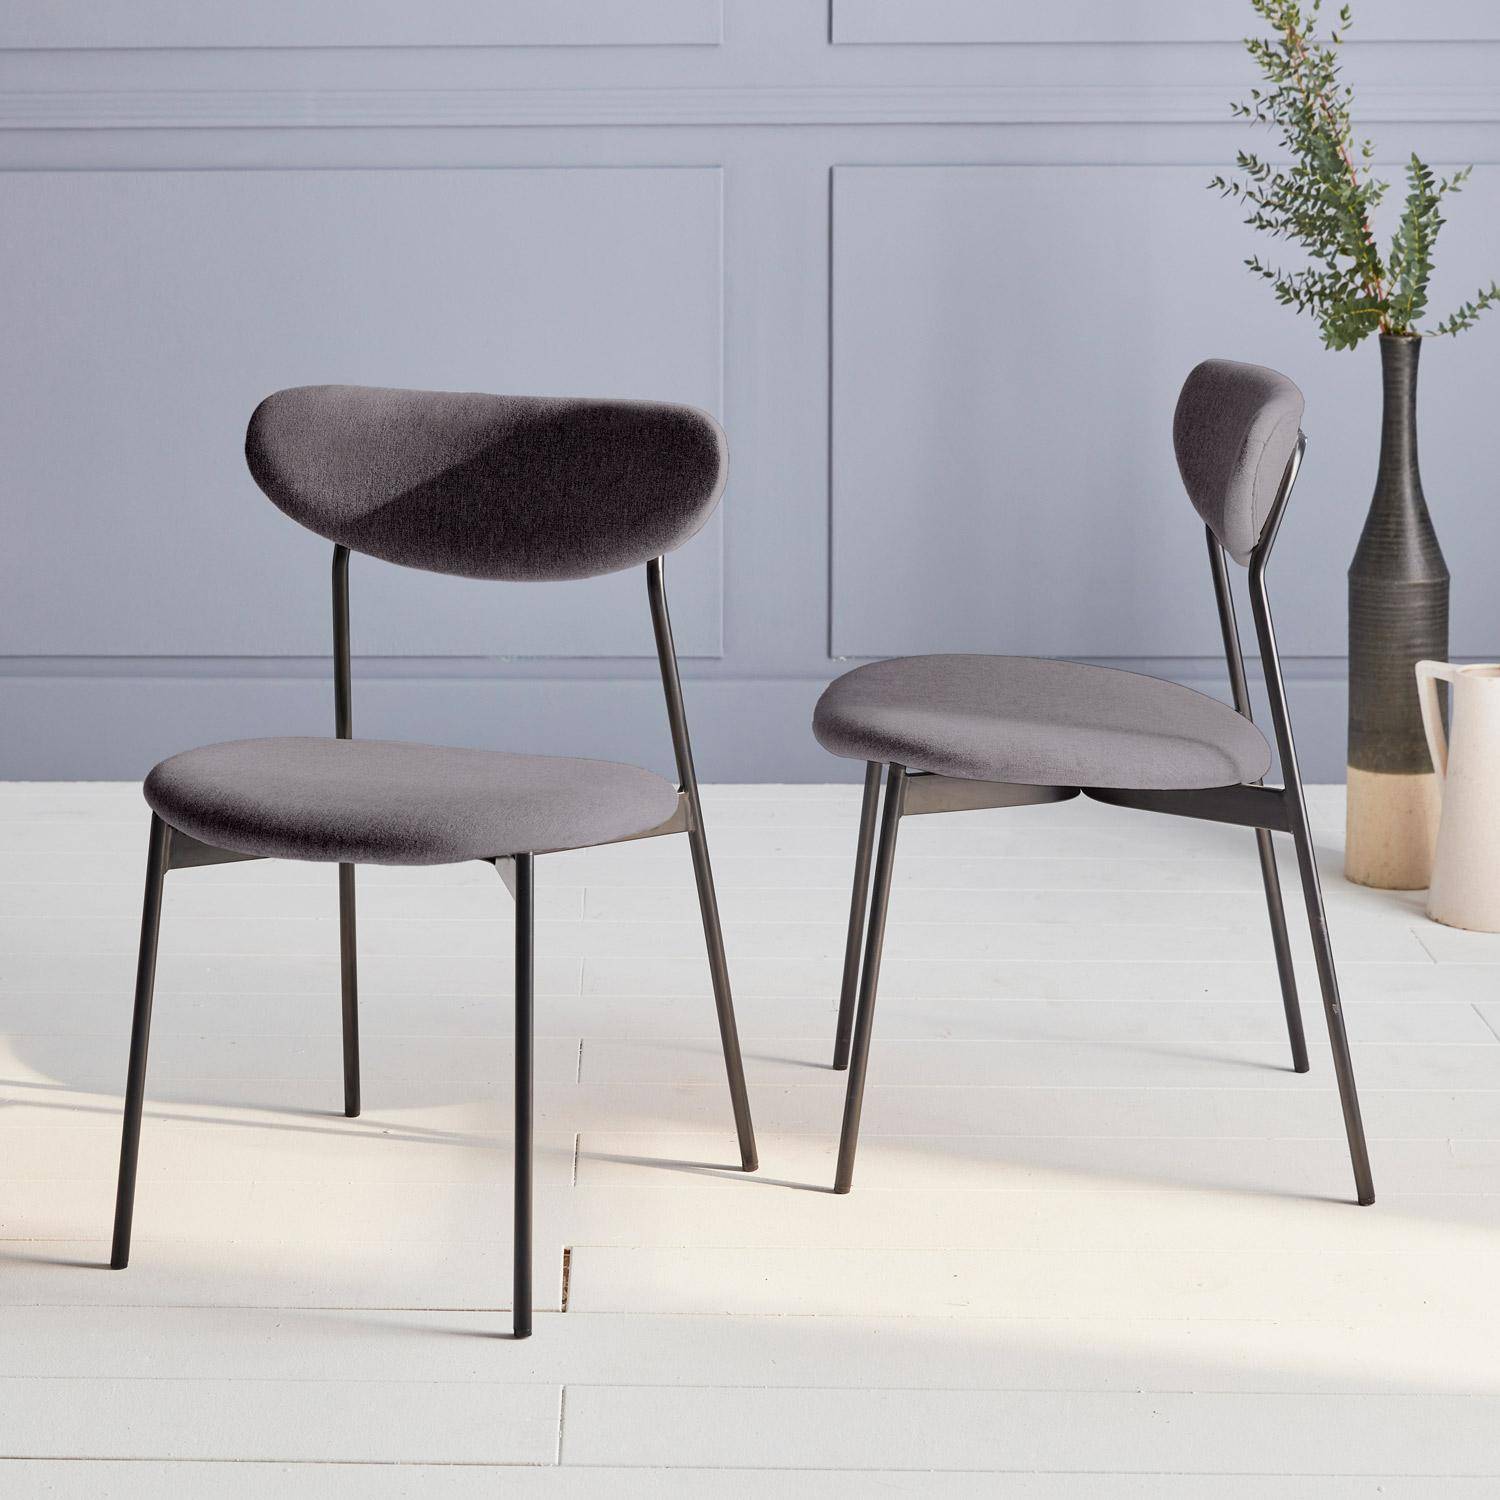 Set of 2 retro style dining chairs with steel legs - Arty - Dark Grey,sweeek,Photo2